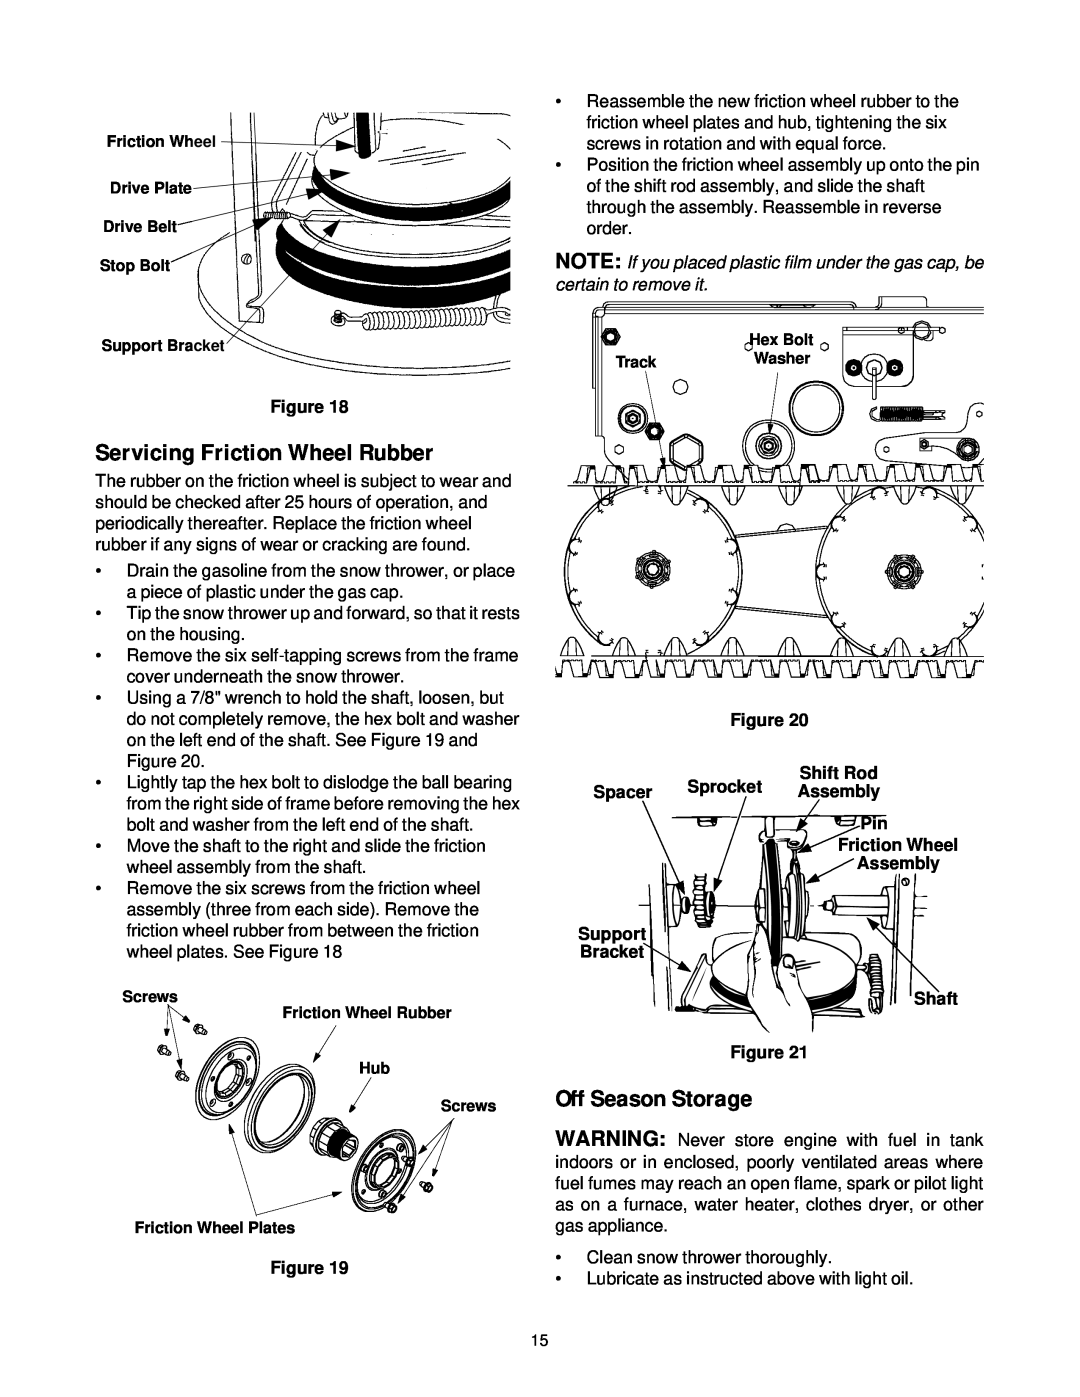 Cub Cadet 926 STE manual Servicing Friction Wheel Rubber, Off Season Storage, Figure Shift Rod Spacer Sprocket Assembly Pin 